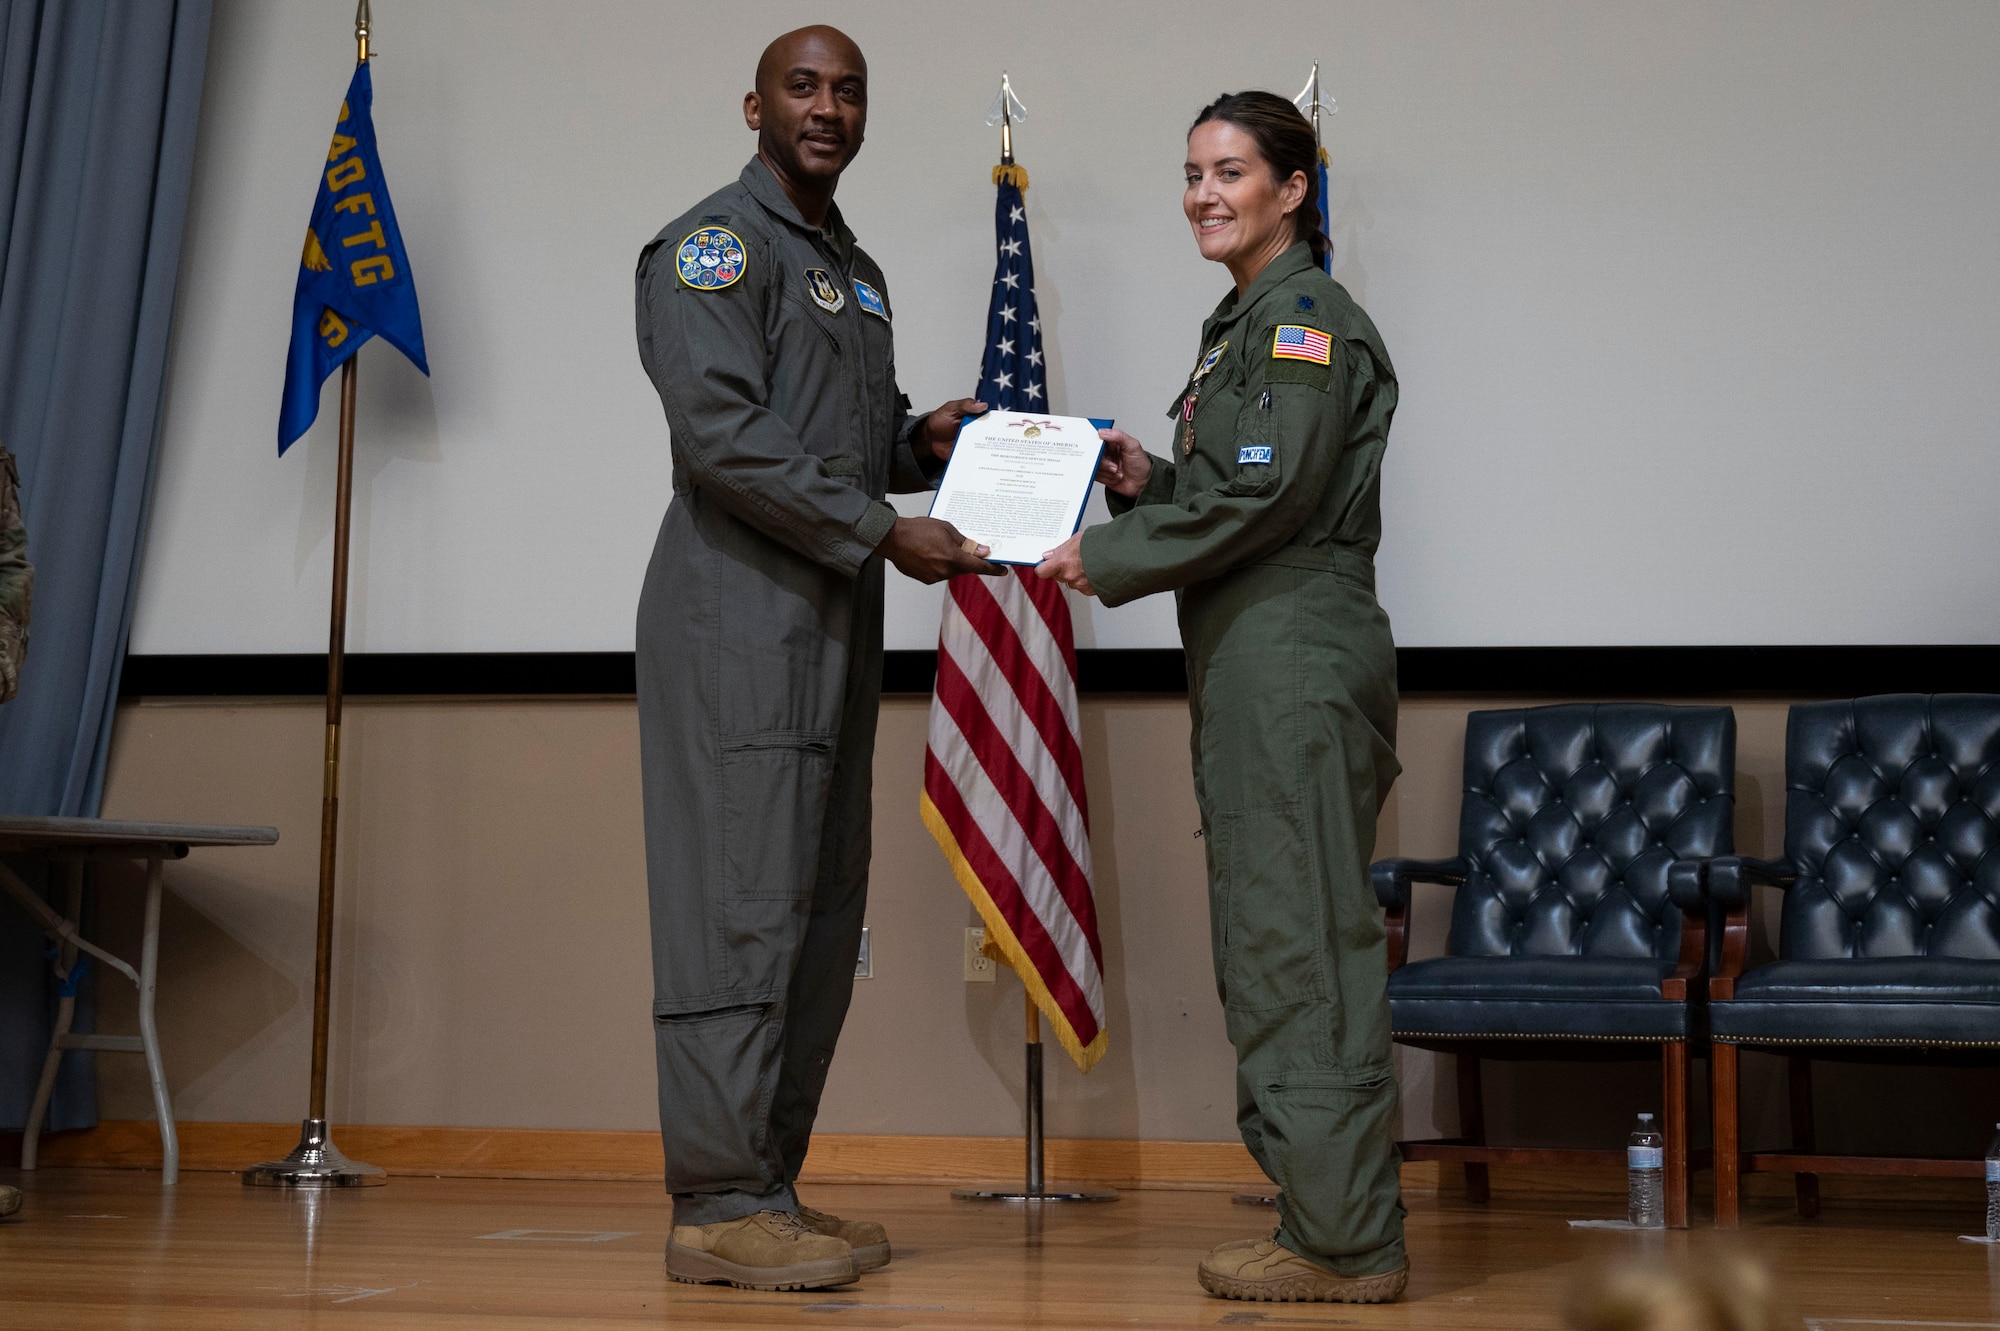 U.S. Air Force Col. Michael McMillan, 340th Flying Training Group director of operations, presents a Meritorious Service Medal to Lt. Col. Christine Van Weezendonk, former 96th Flying Training Squadron commander, during the 96th FTS change of command ceremony at Laughlin Air Force Base, Texas, May 10, 2024. The Meritorious Service Medal was established as the counterpart of the Bronze Star Medal for the recognition of meritorious noncombatant service. (U.S. Air Force photo by Senior Airman Kailee Reynolds)